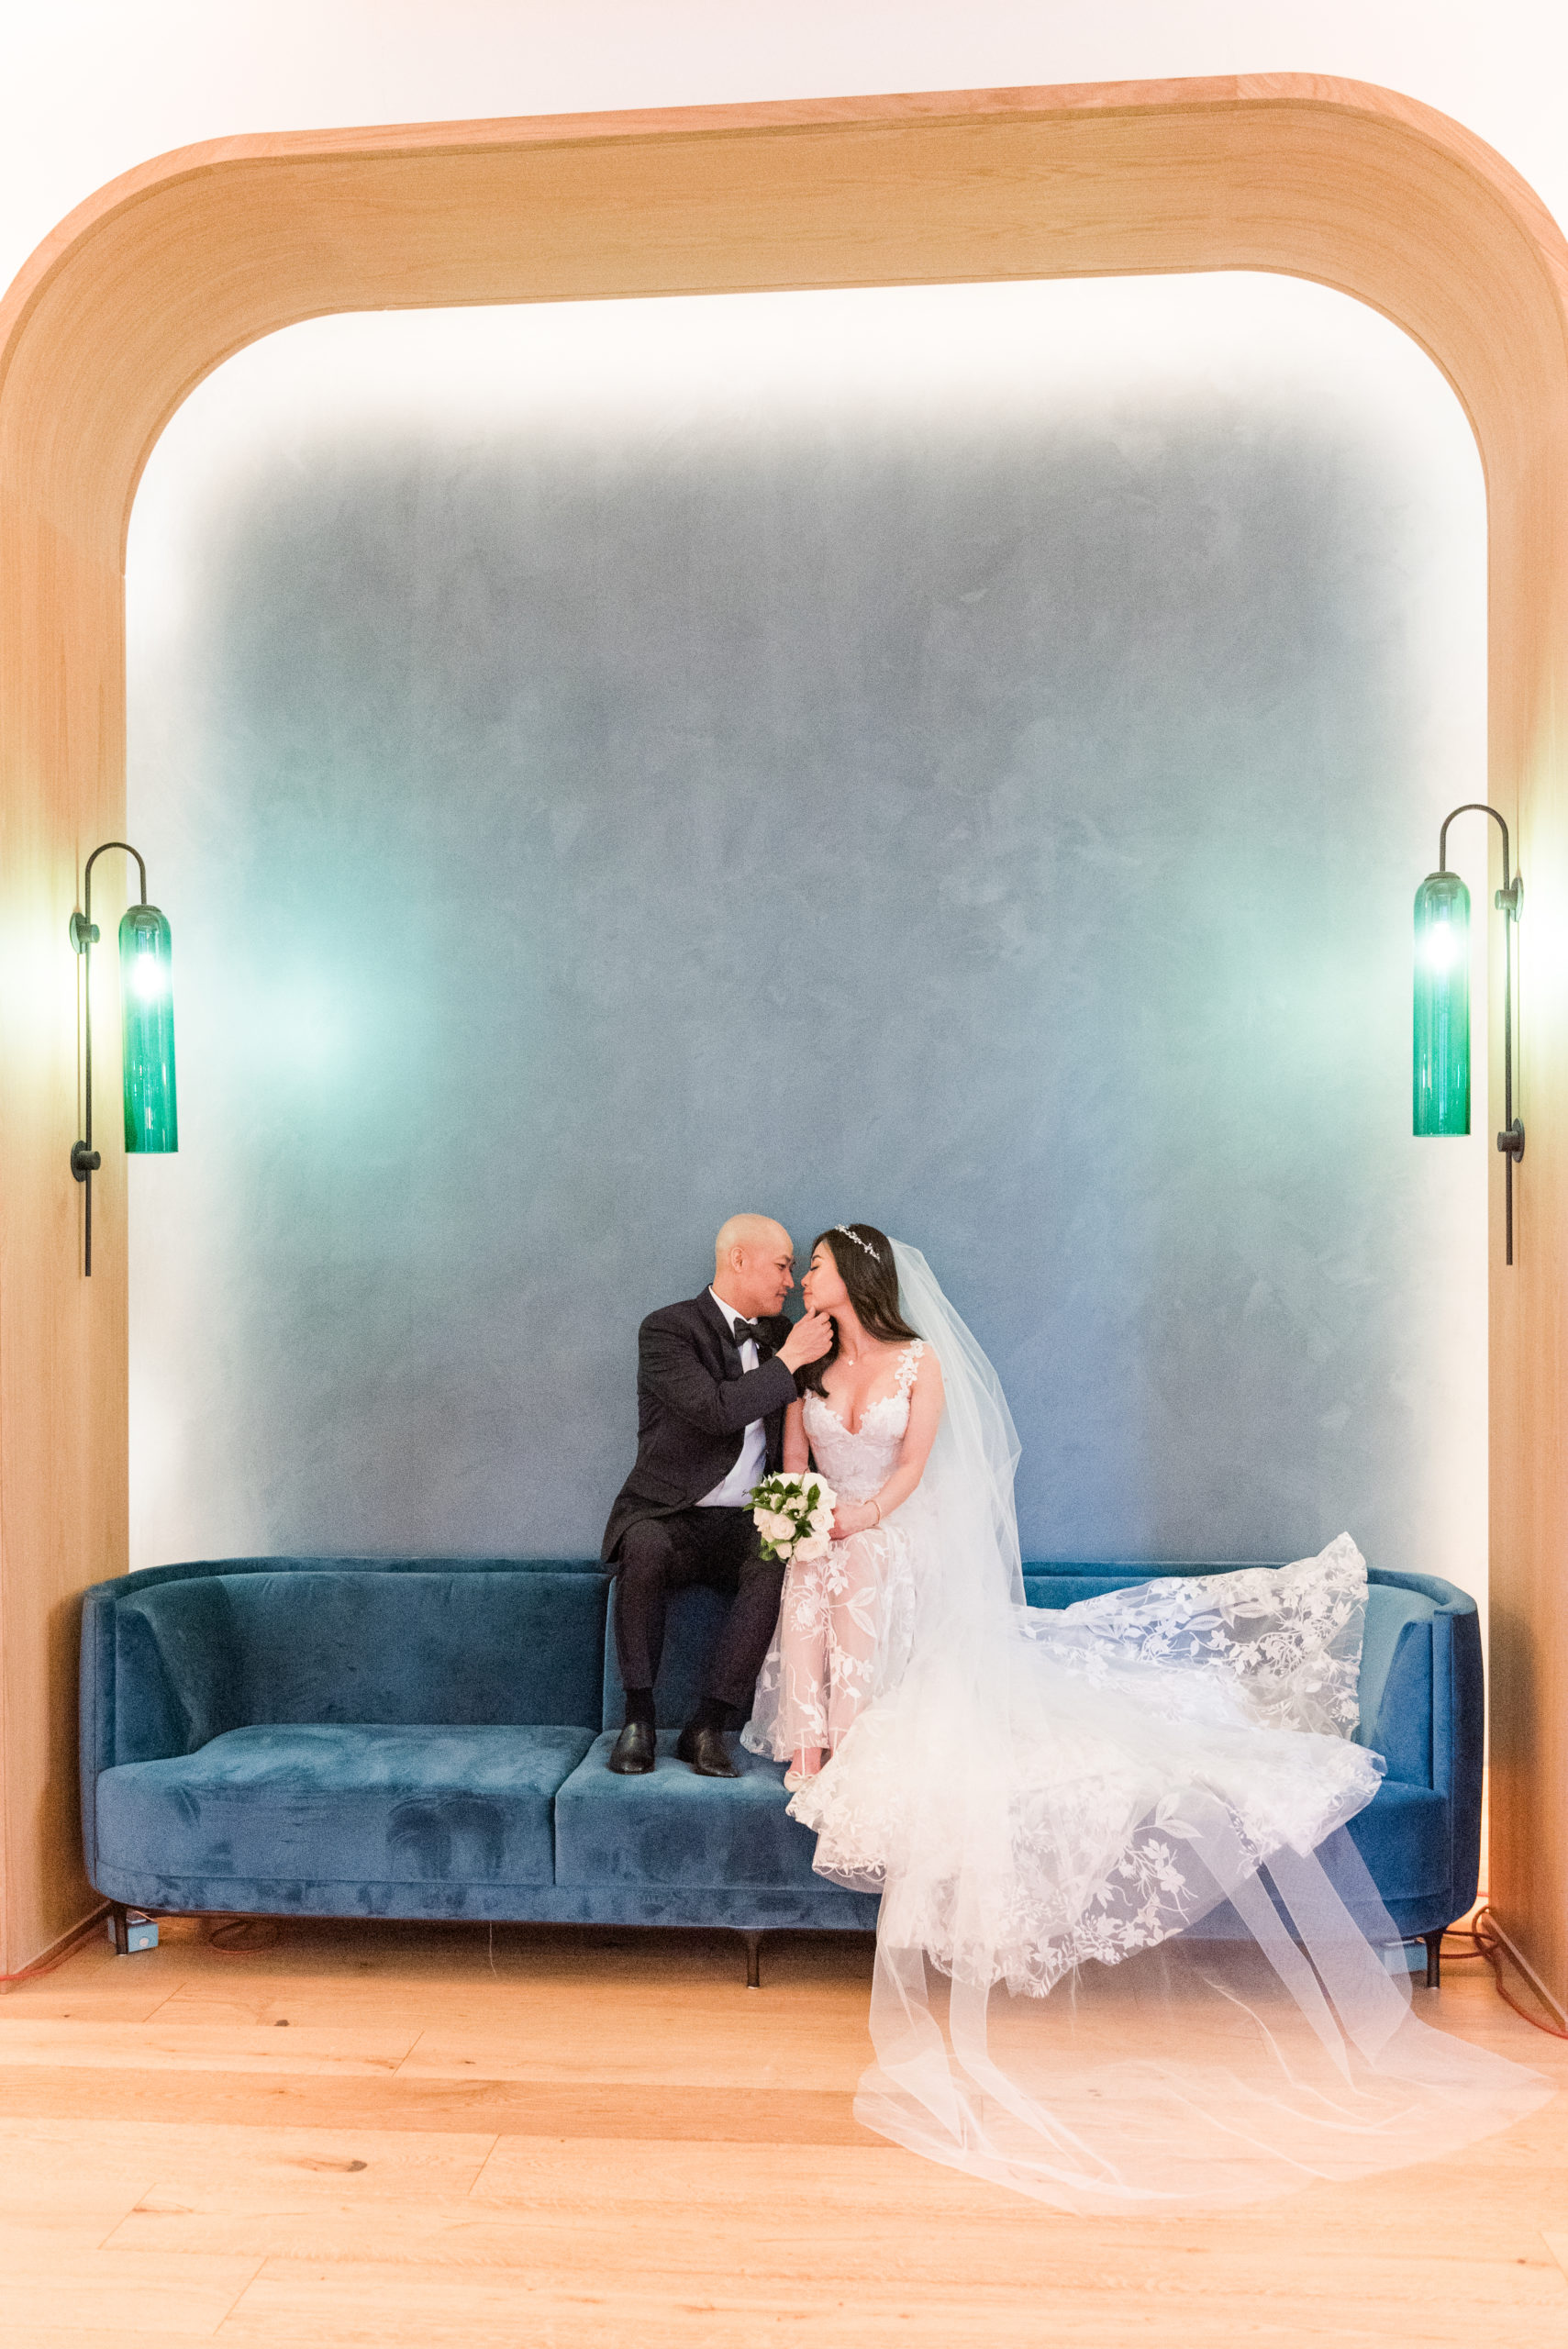 Tiffany and Tommy Wedding at The Virgin Hotels in Nashville, Tennessee. This glamourous, modern wedding captured by Rebecca Musayev Photography was nothing short of spectacular.